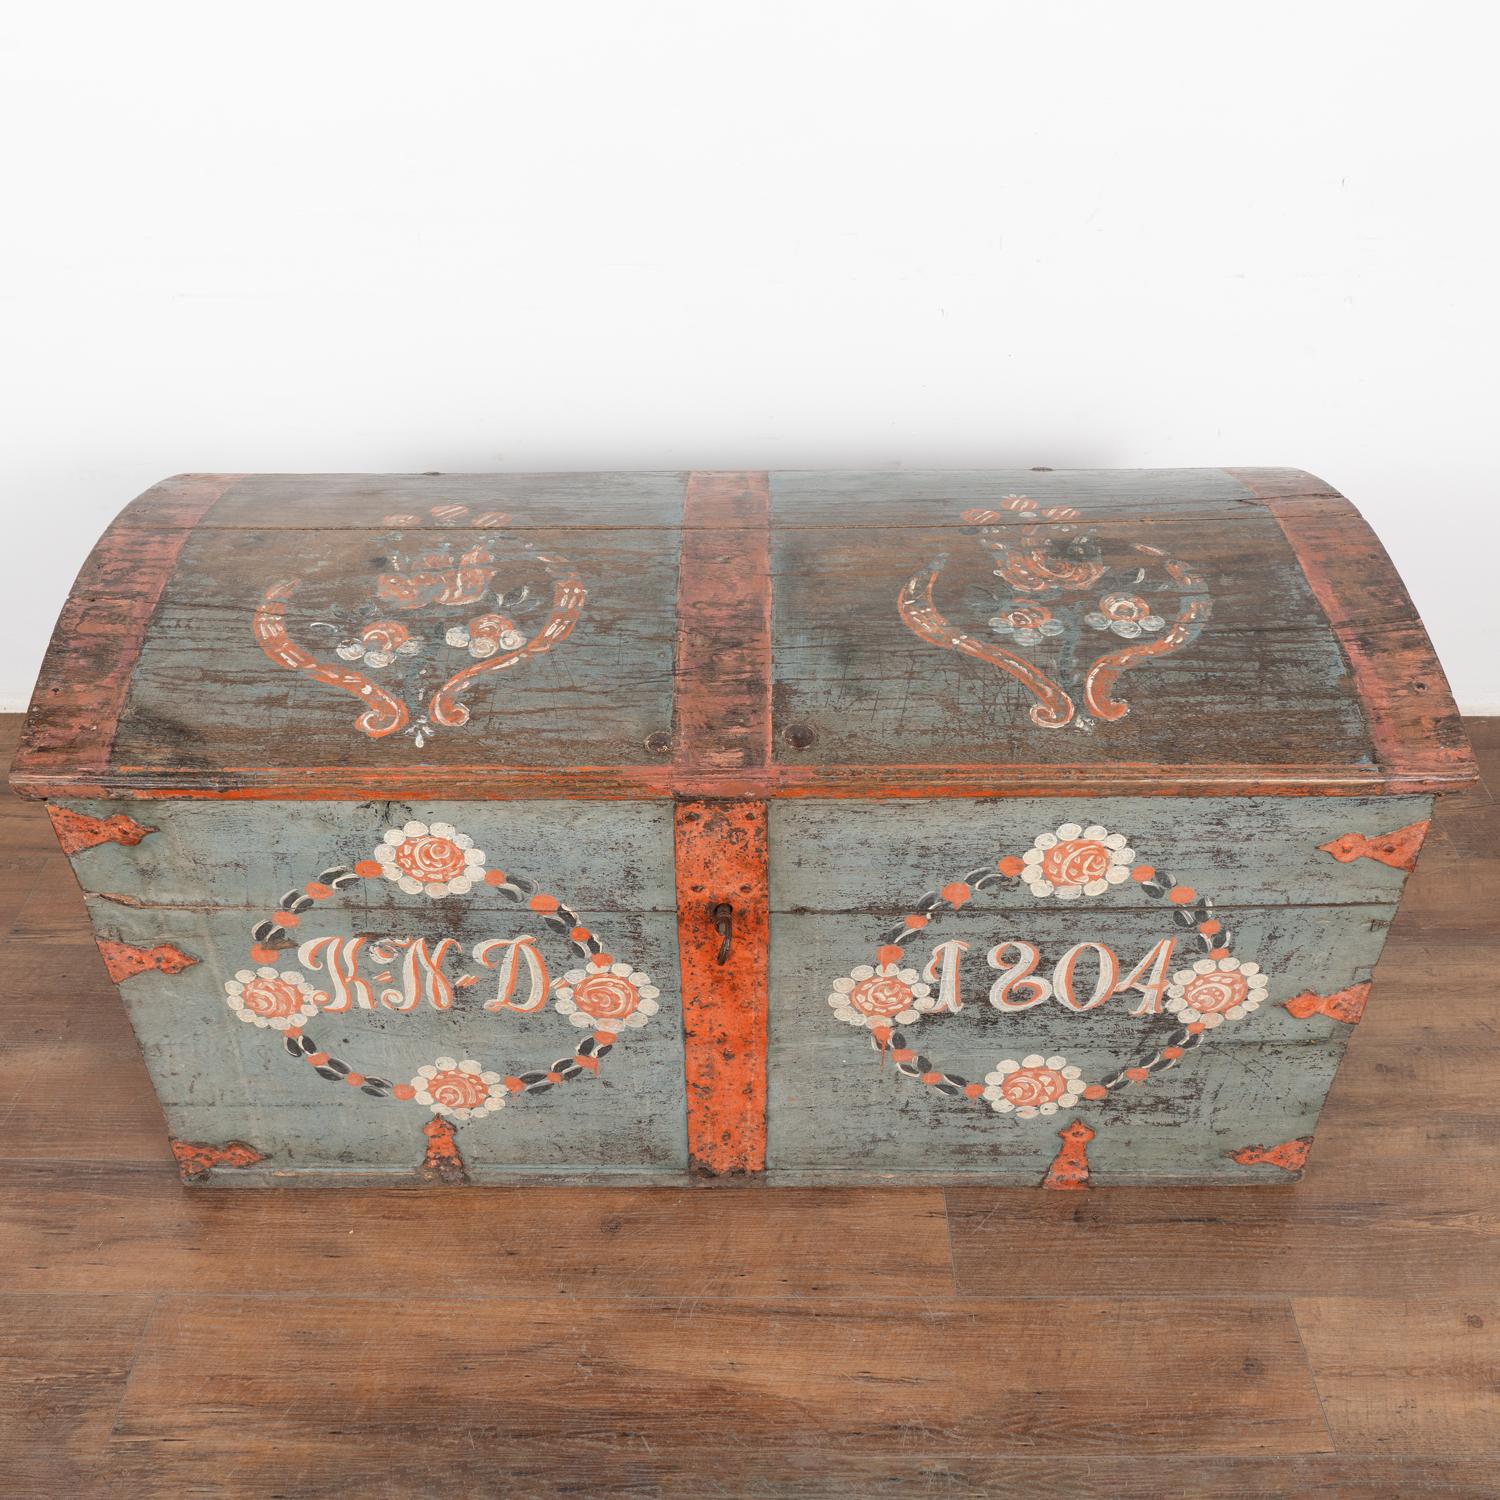 19th Century Original Blue Painted Dome Top Trunk from Sweden dated 1804 For Sale